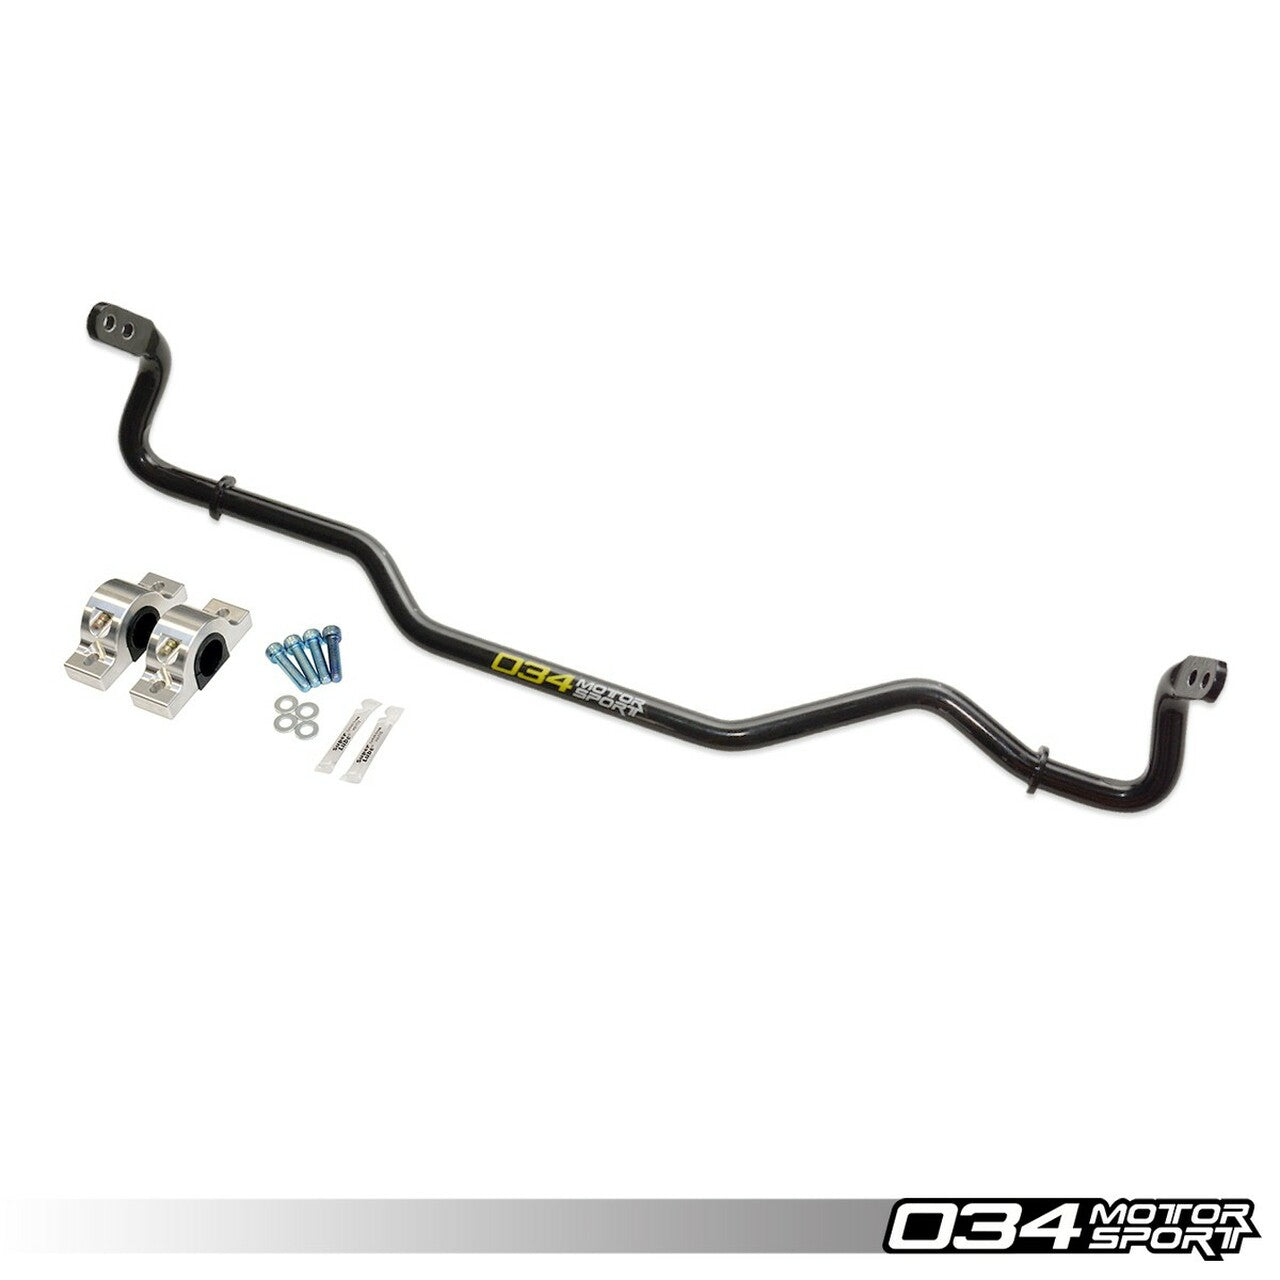 034Motorsport 23.8mm Rear Sway bar for TT RS (8S) and RS3 ~(8V) - Wayside Performance